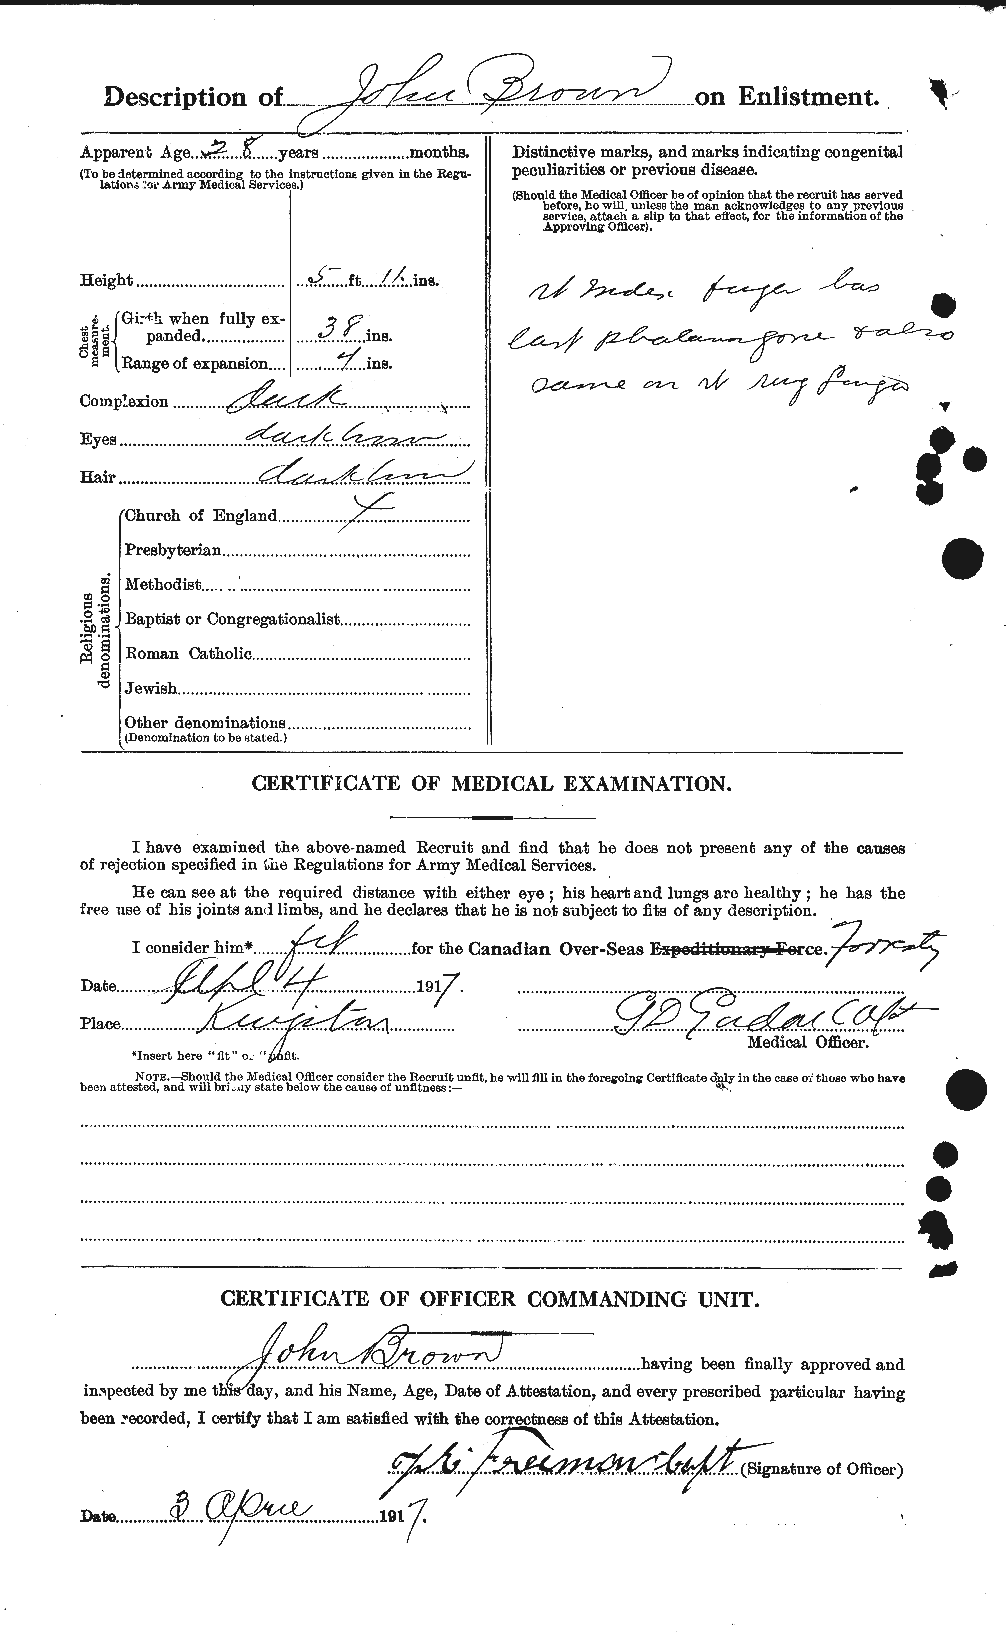 Personnel Records of the First World War - CEF 263903b